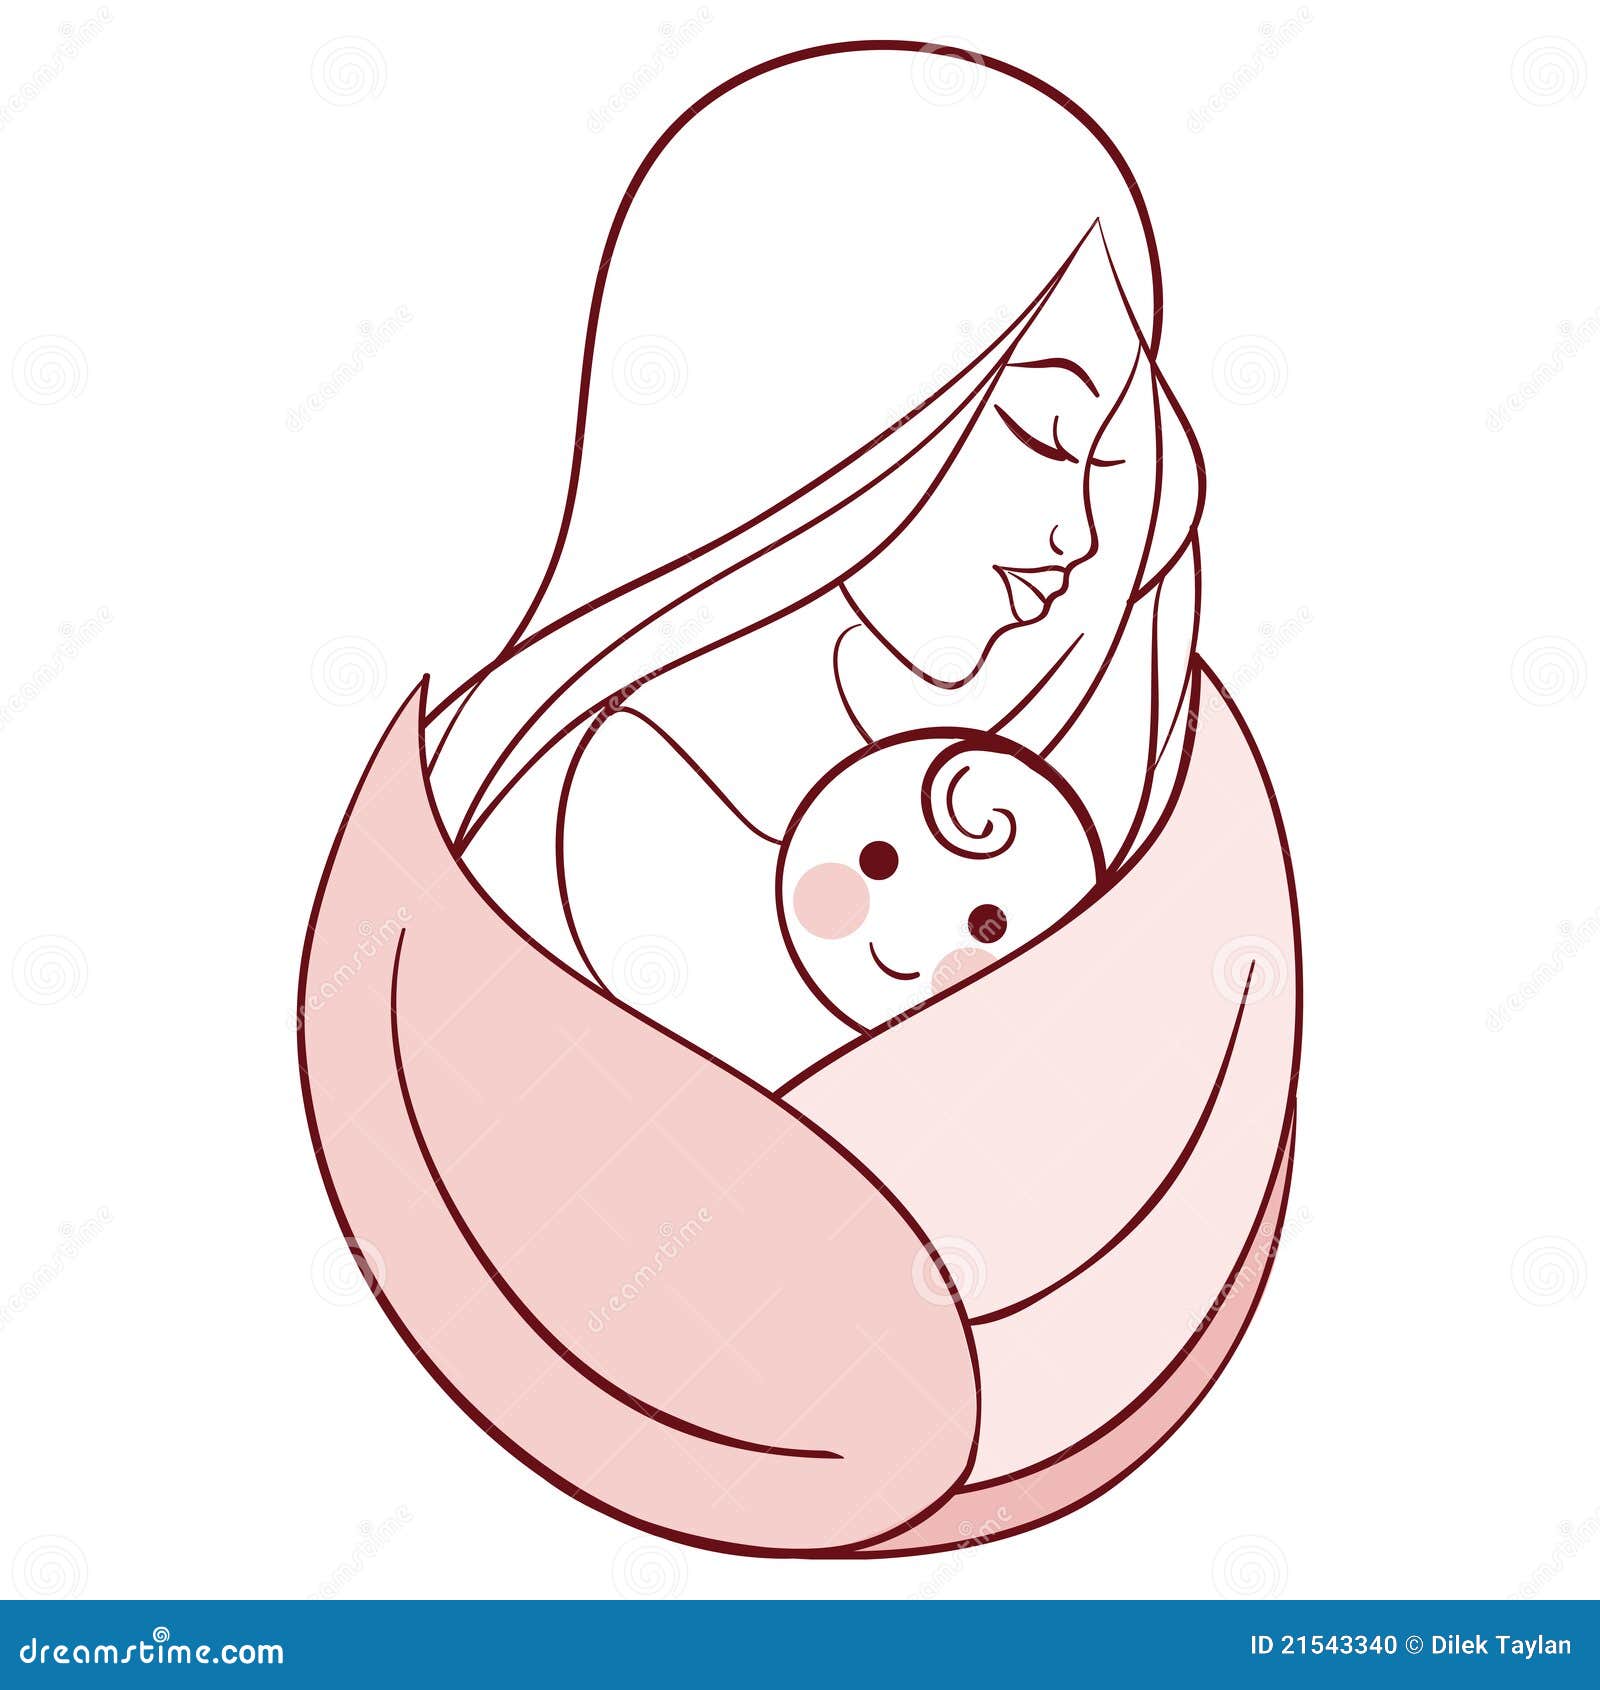 clipart of mother and child - photo #46